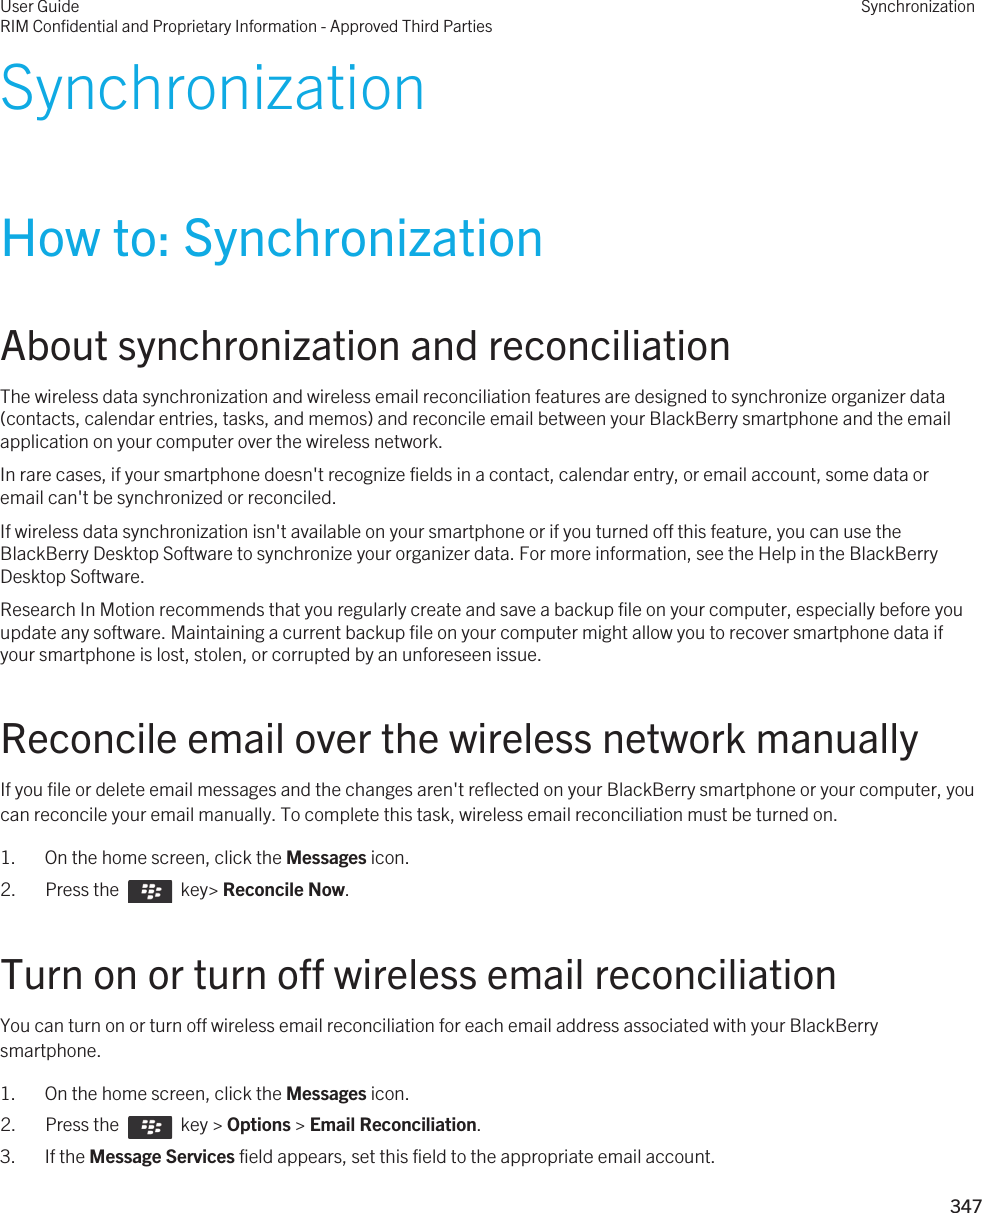 SynchronizationHow to: SynchronizationAbout synchronization and reconciliationThe wireless data synchronization and wireless email reconciliation features are designed to synchronize organizer data (contacts, calendar entries, tasks, and memos) and reconcile email between your BlackBerry smartphone and the email application on your computer over the wireless network.In rare cases, if your smartphone doesn&apos;t recognize fields in a contact, calendar entry, or email account, some data or email can&apos;t be synchronized or reconciled.If wireless data synchronization isn&apos;t available on your smartphone or if you turned off this feature, you can use the BlackBerry Desktop Software to synchronize your organizer data. For more information, see the Help in the BlackBerry Desktop Software.Research In Motion recommends that you regularly create and save a backup file on your computer, especially before you update any software. Maintaining a current backup file on your computer might allow you to recover smartphone data if your smartphone is lost, stolen, or corrupted by an unforeseen issue.Reconcile email over the wireless network manuallyIf you file or delete email messages and the changes aren&apos;t reflected on your BlackBerry smartphone or your computer, you can reconcile your email manually. To complete this task, wireless email reconciliation must be turned on.1. On the home screen, click the Messages icon.2.  Press the    key&gt; Reconcile Now.Turn on or turn off wireless email reconciliationYou can turn on or turn off wireless email reconciliation for each email address associated with your BlackBerry smartphone.1. On the home screen, click the Messages icon.2.  Press the    key &gt; Options &gt; Email Reconciliation. 3. If the Message Services field appears, set this field to the appropriate email account.User GuideRIM Confidential and Proprietary Information - Approved Third PartiesSynchronization347 